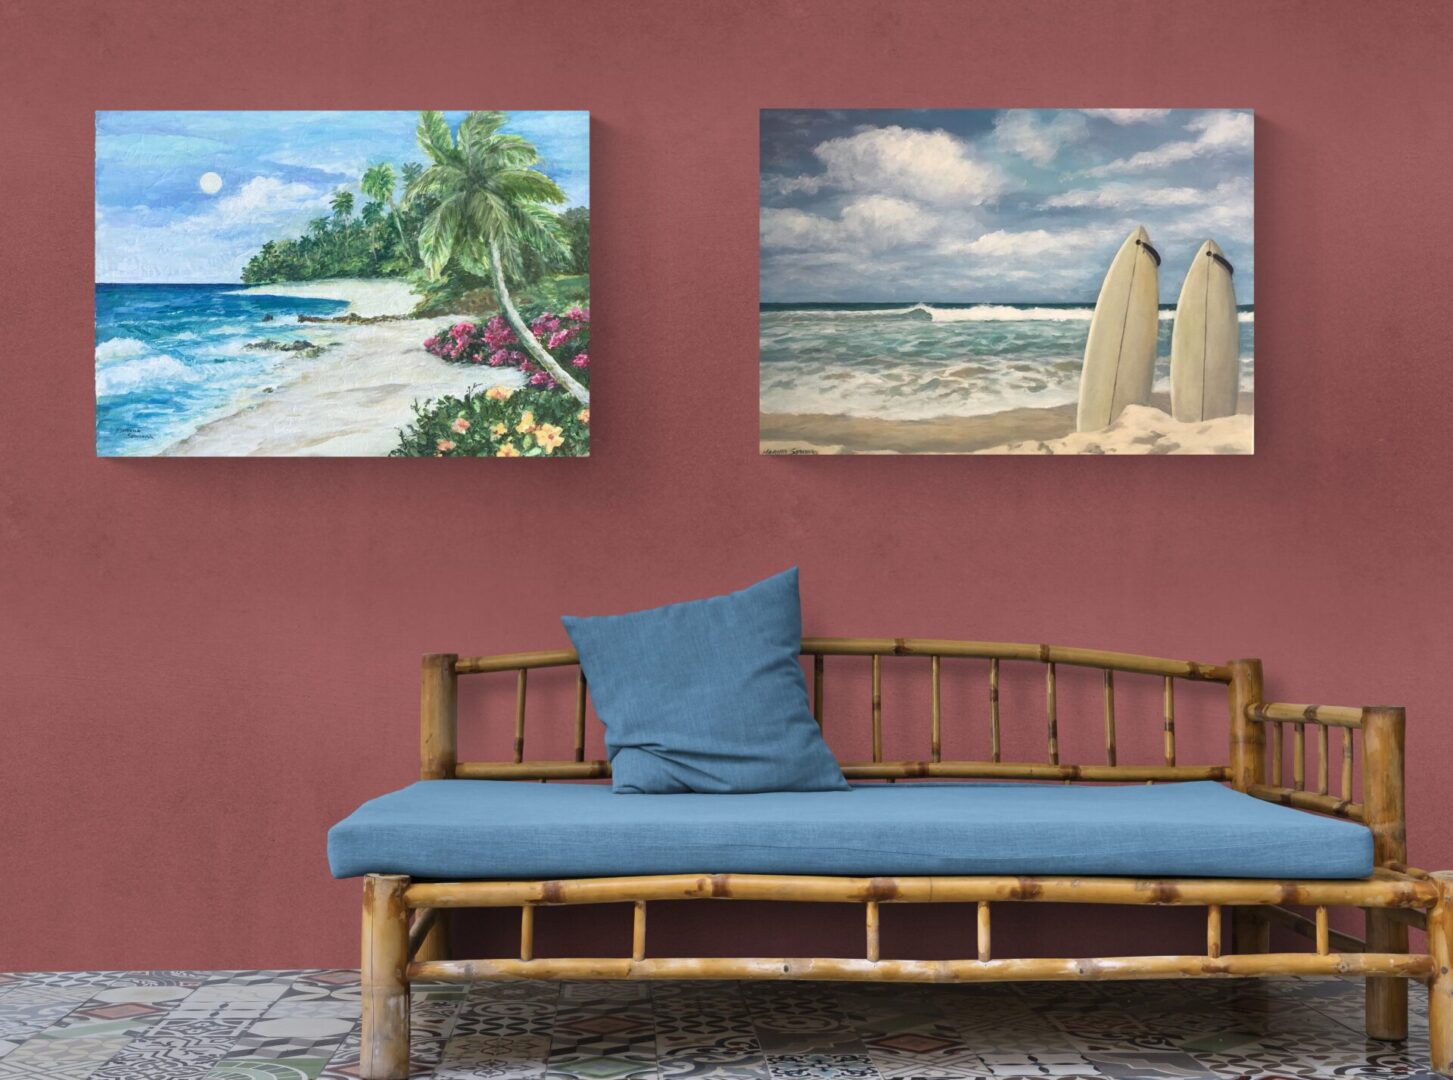 Local fine art for sale - Two paintings of surfboards on a couch in front of a red wall.